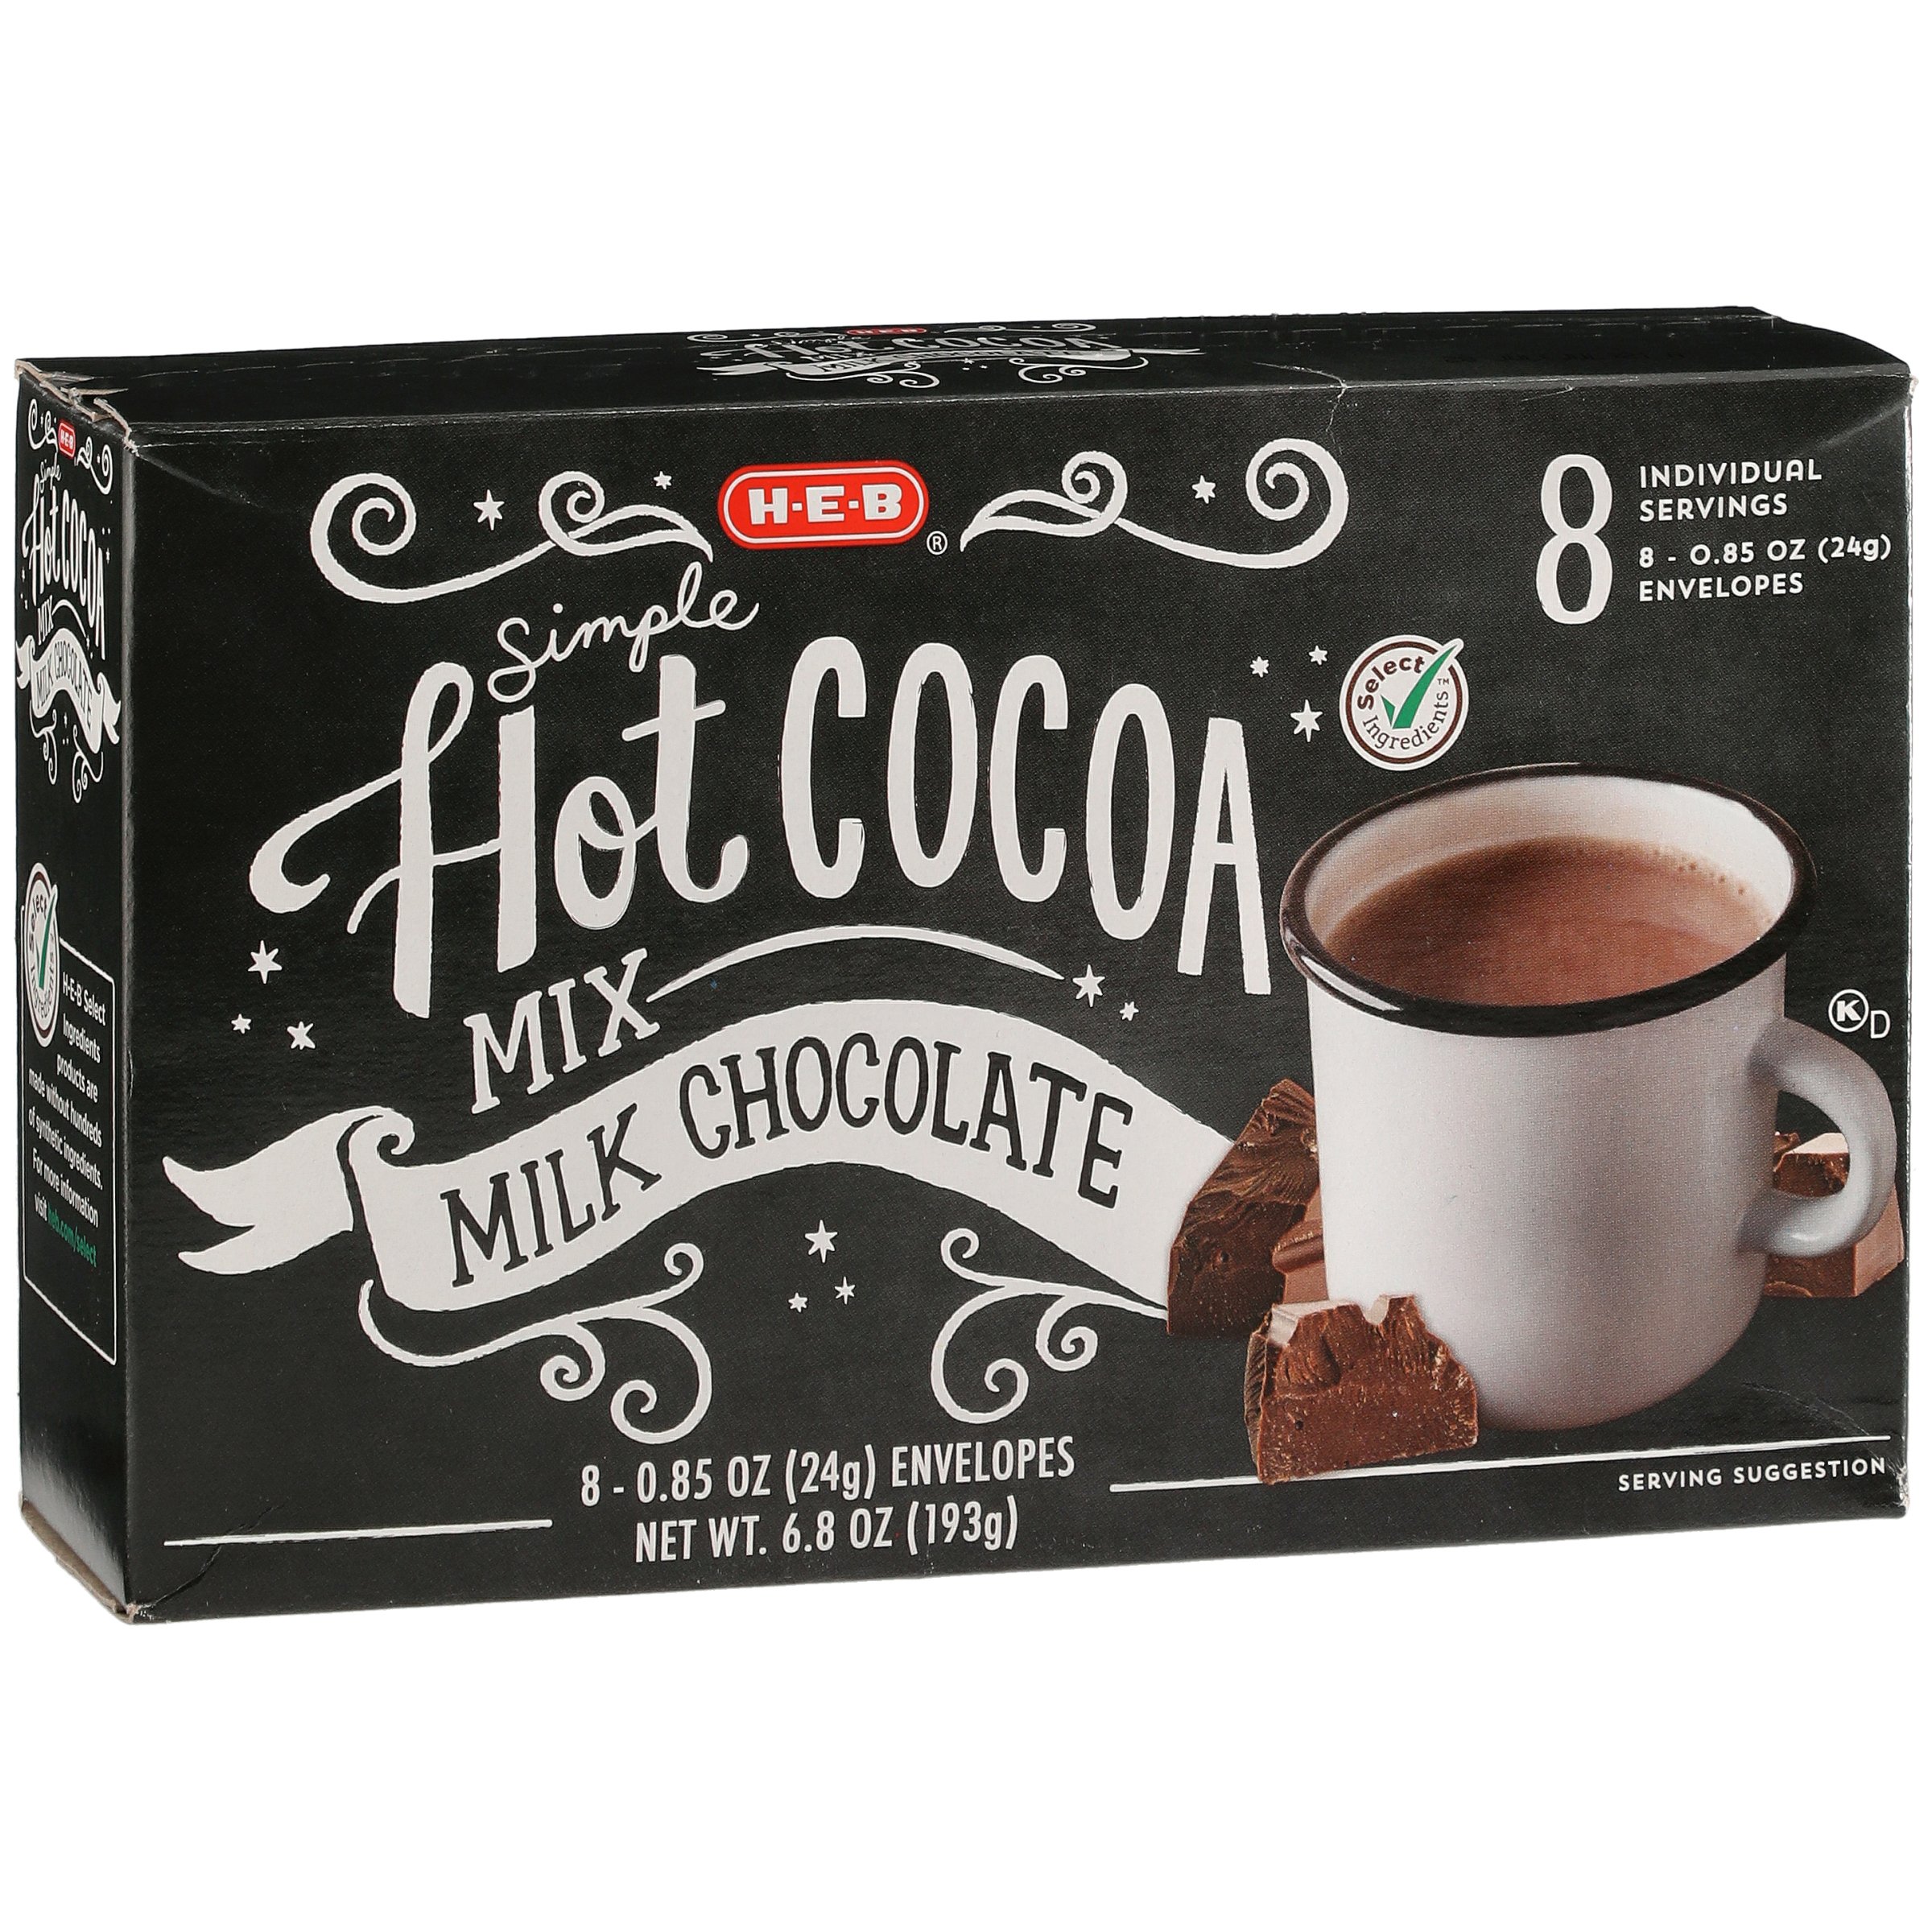 Swiss Miss Milk Chocolate Cocoa Mix Canister - Shop Cocoa at H-E-B